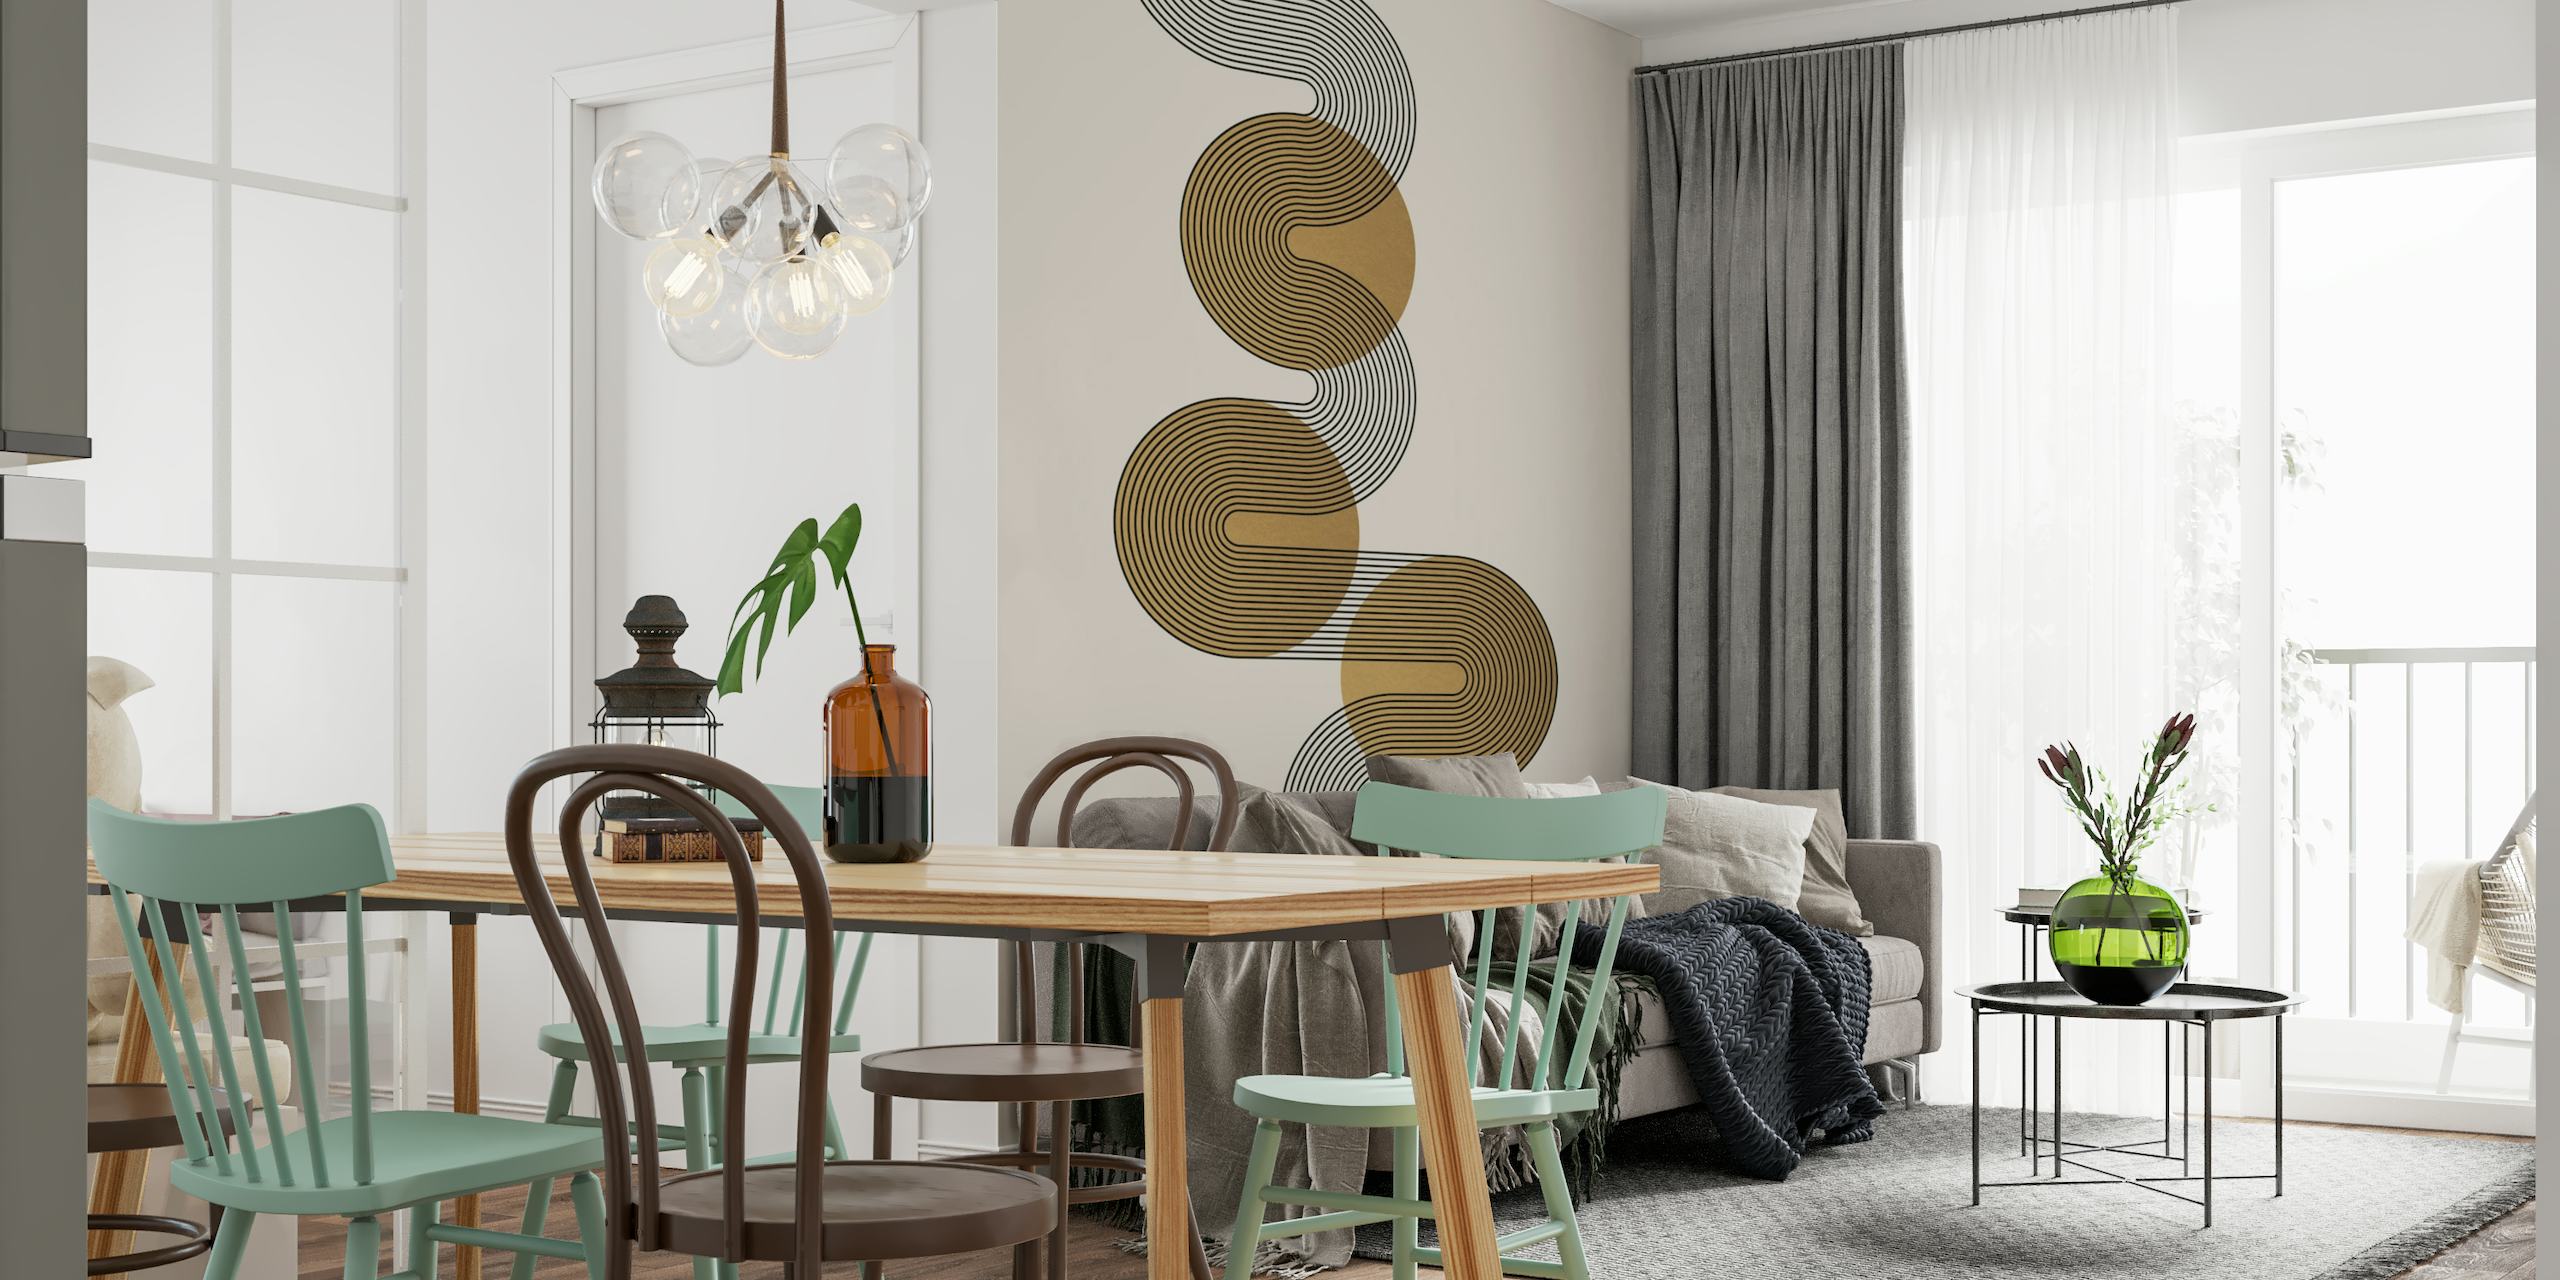 Art Deco style wall mural featuring line-art waves interspersed with golden circles